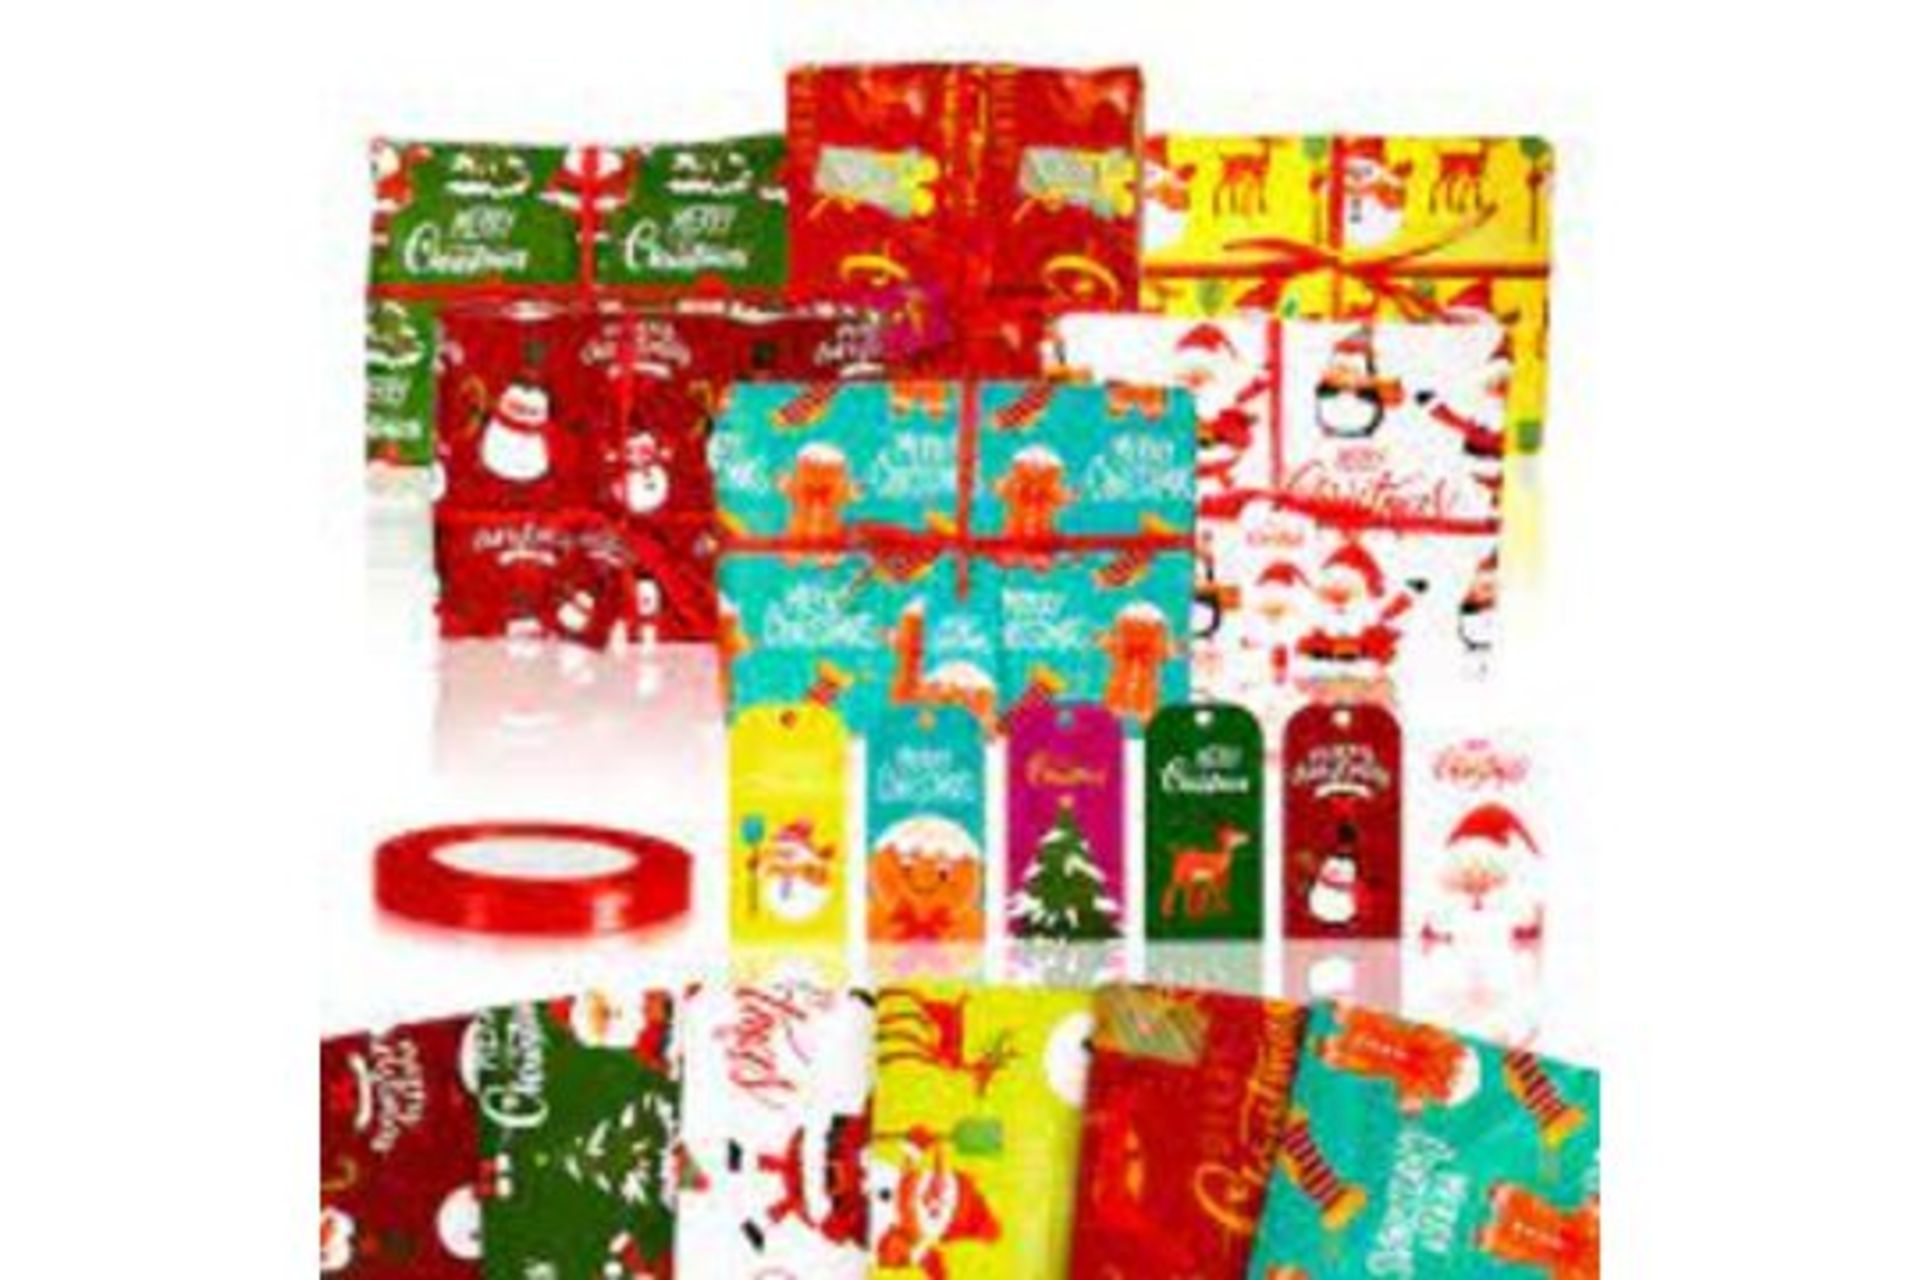 TRADE LOT 600 X BRAND NEW ASSORTED SETS OF 6 FOLDED SHEETS LUXURY CHRISTMAS WRAPPING PAPER SETS IN - Image 2 of 4